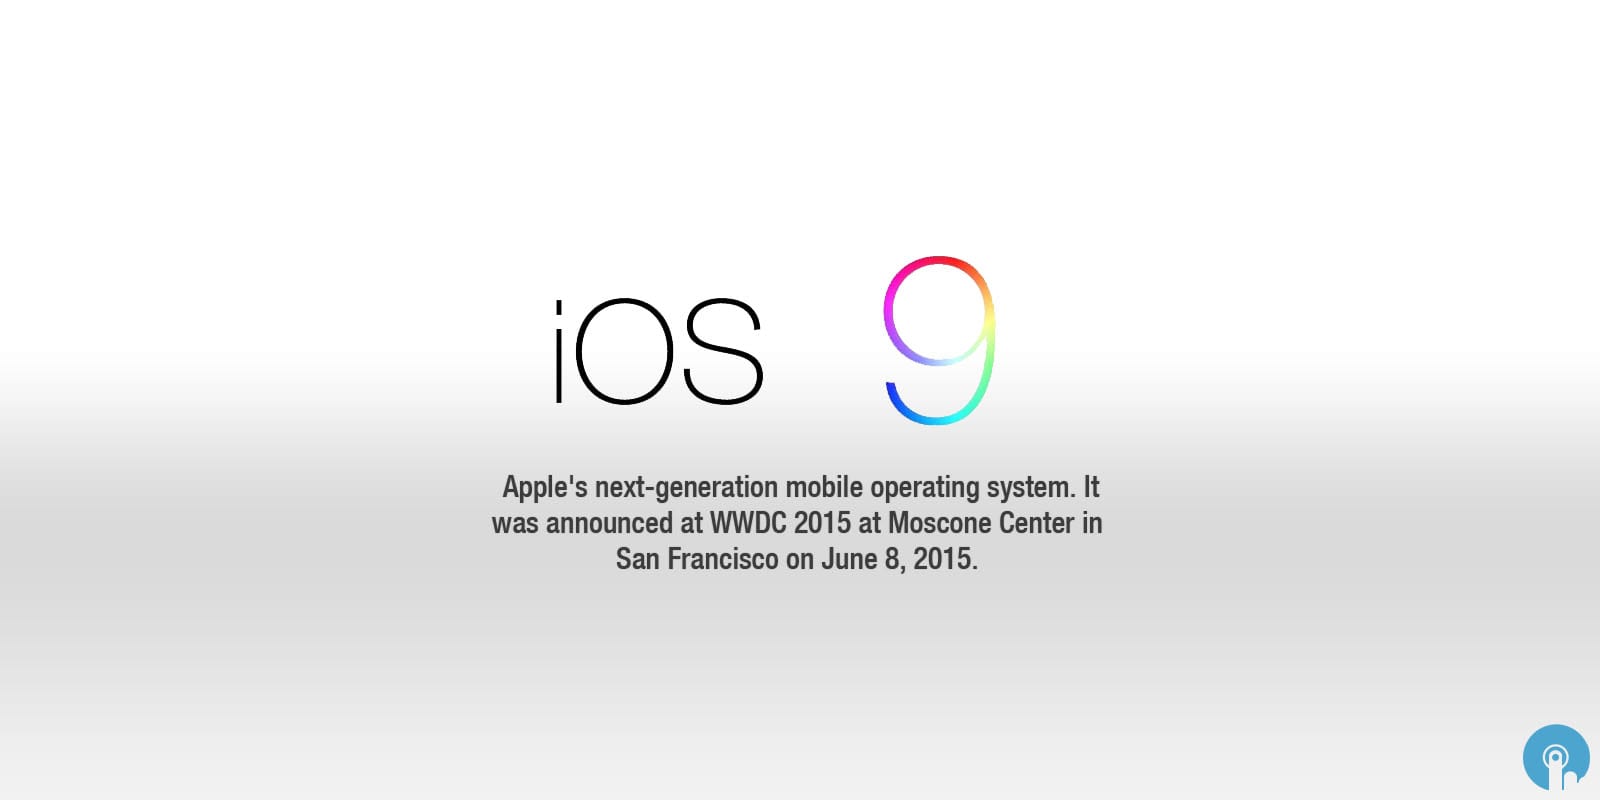 image for ios 9